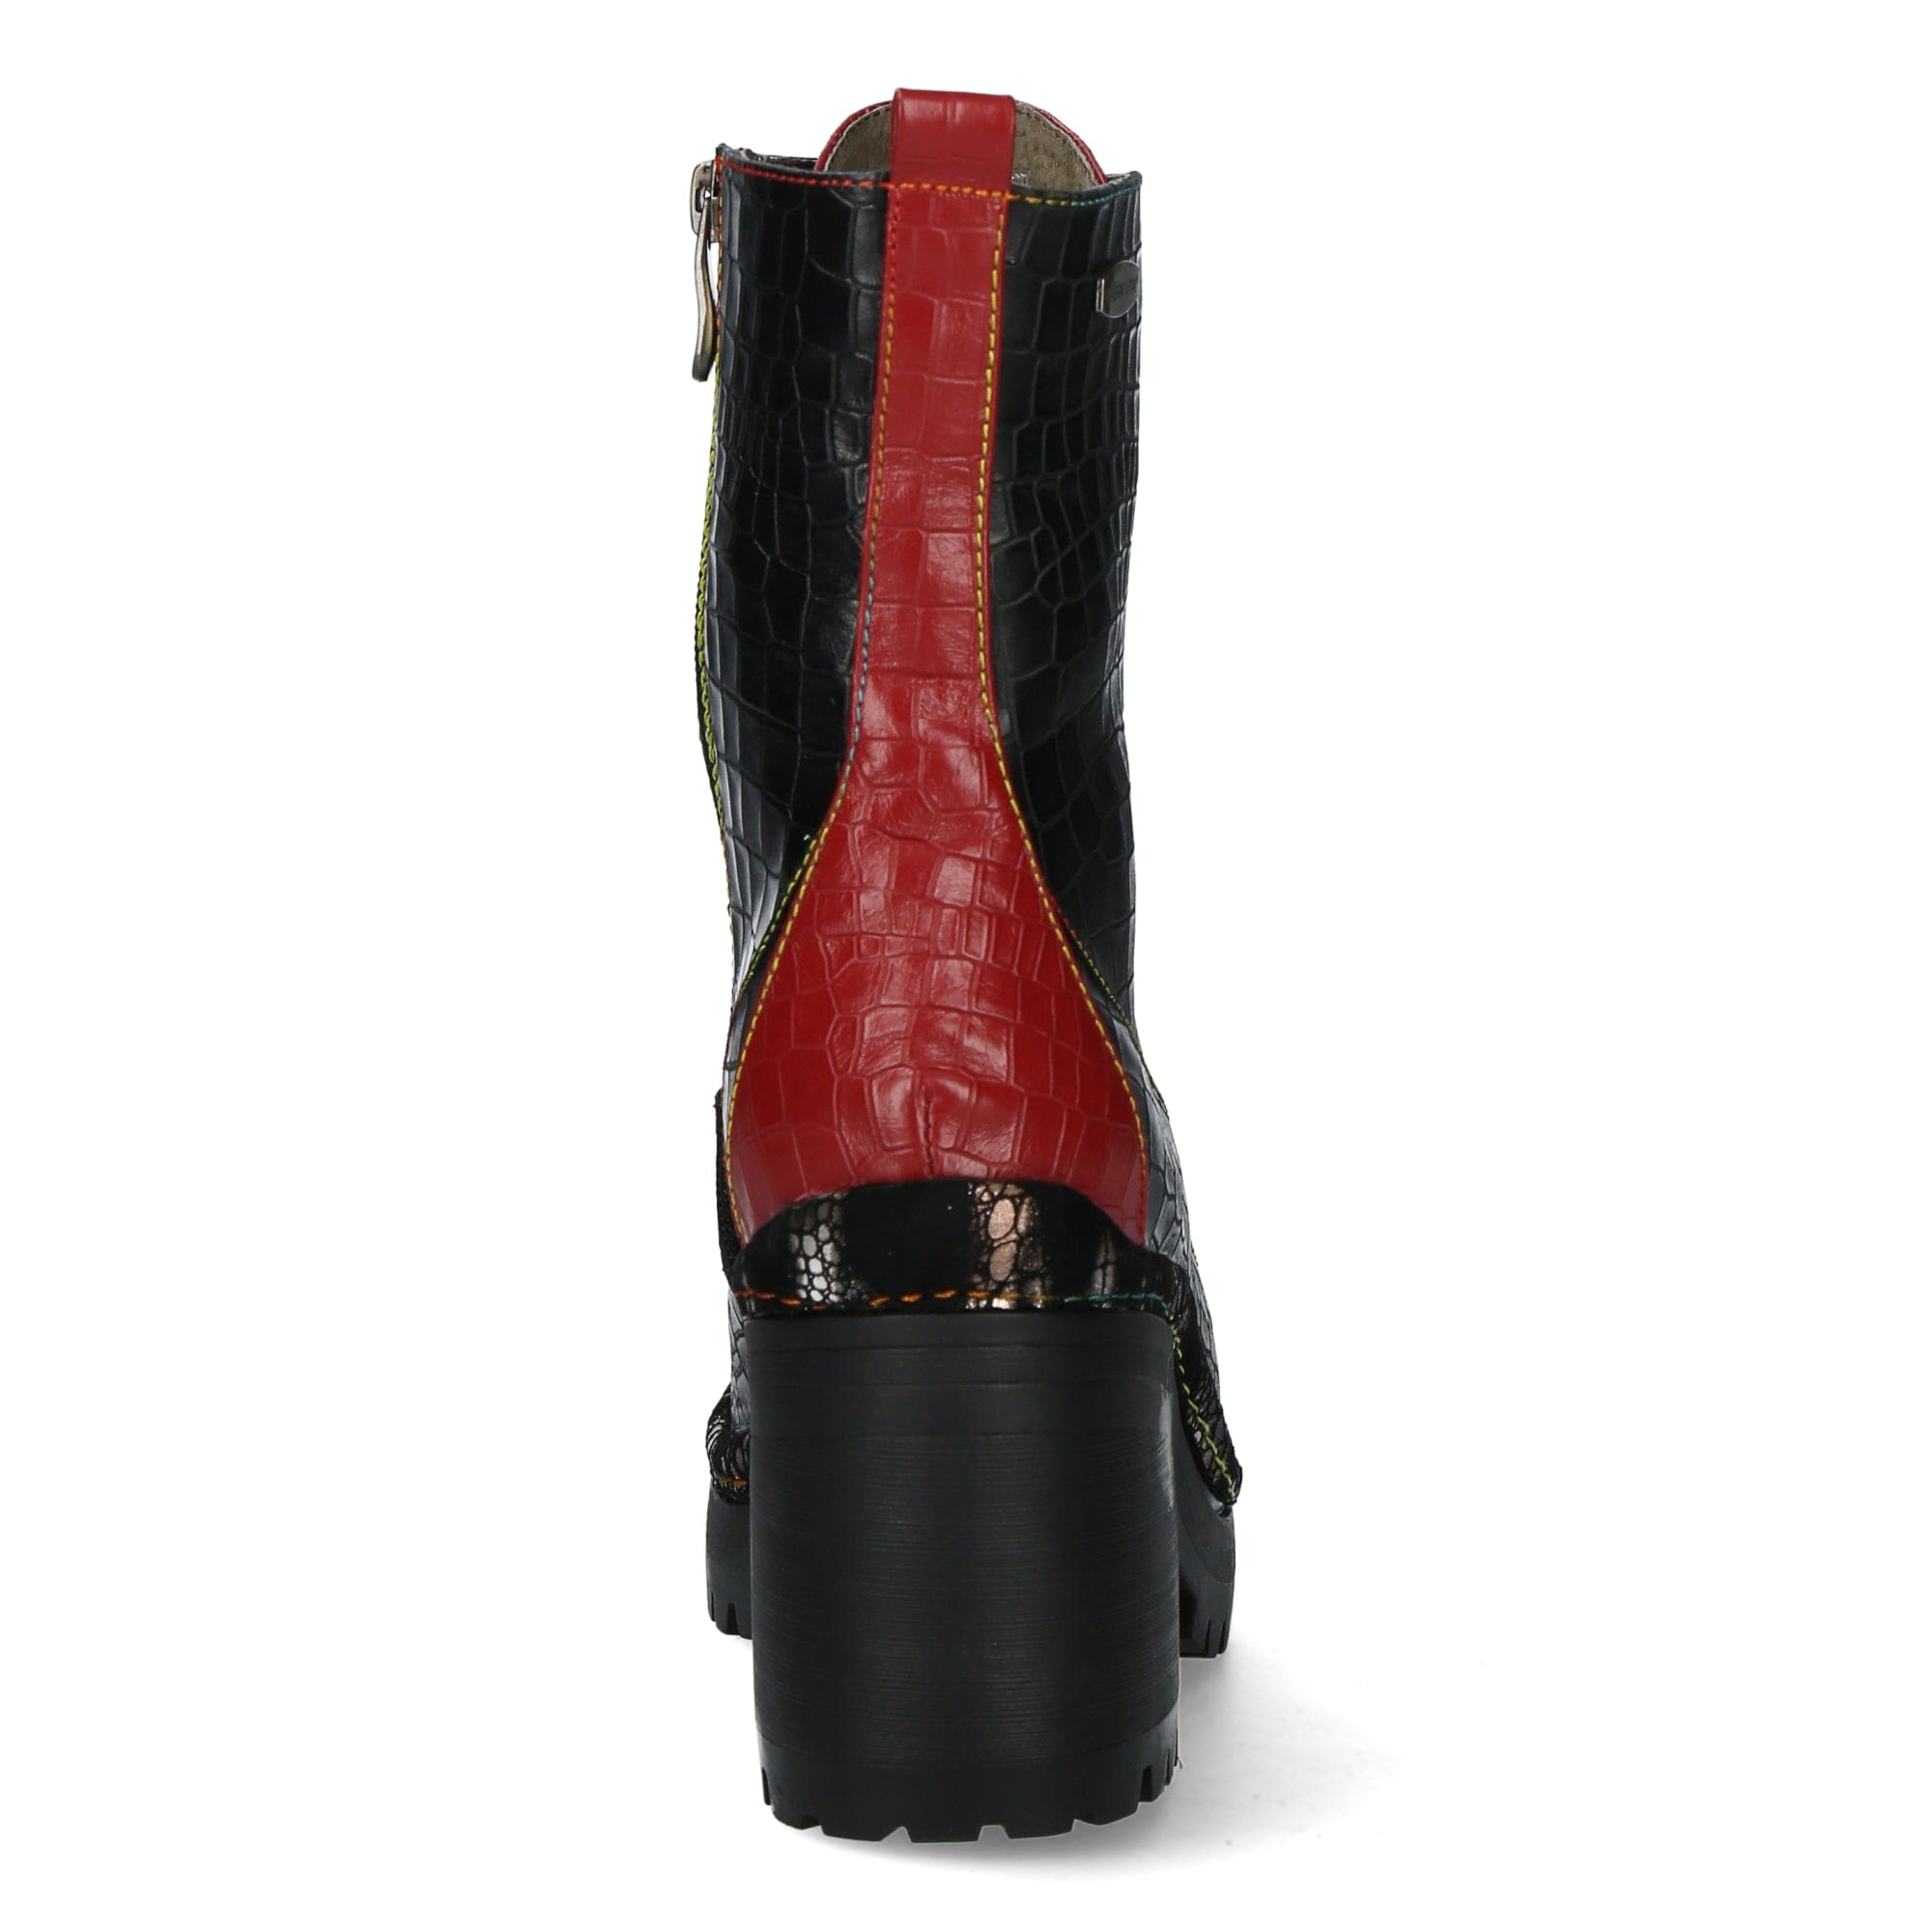 Chaussure MONAO 02 - Boots